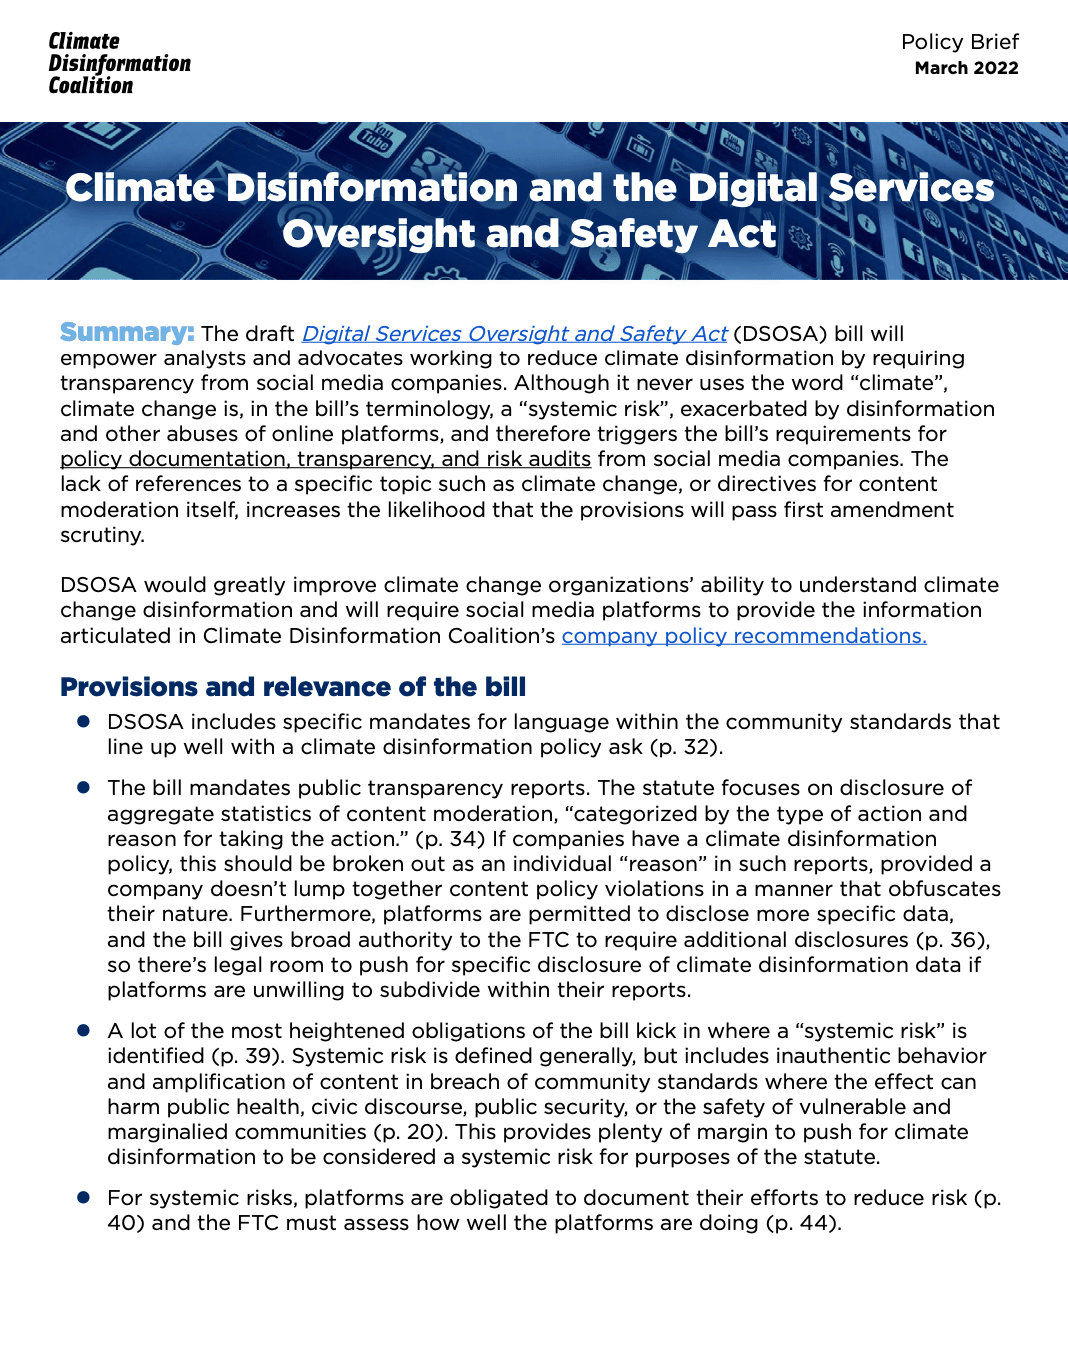 Climate Disinformation and the Digital Services Oversight & Safety Act